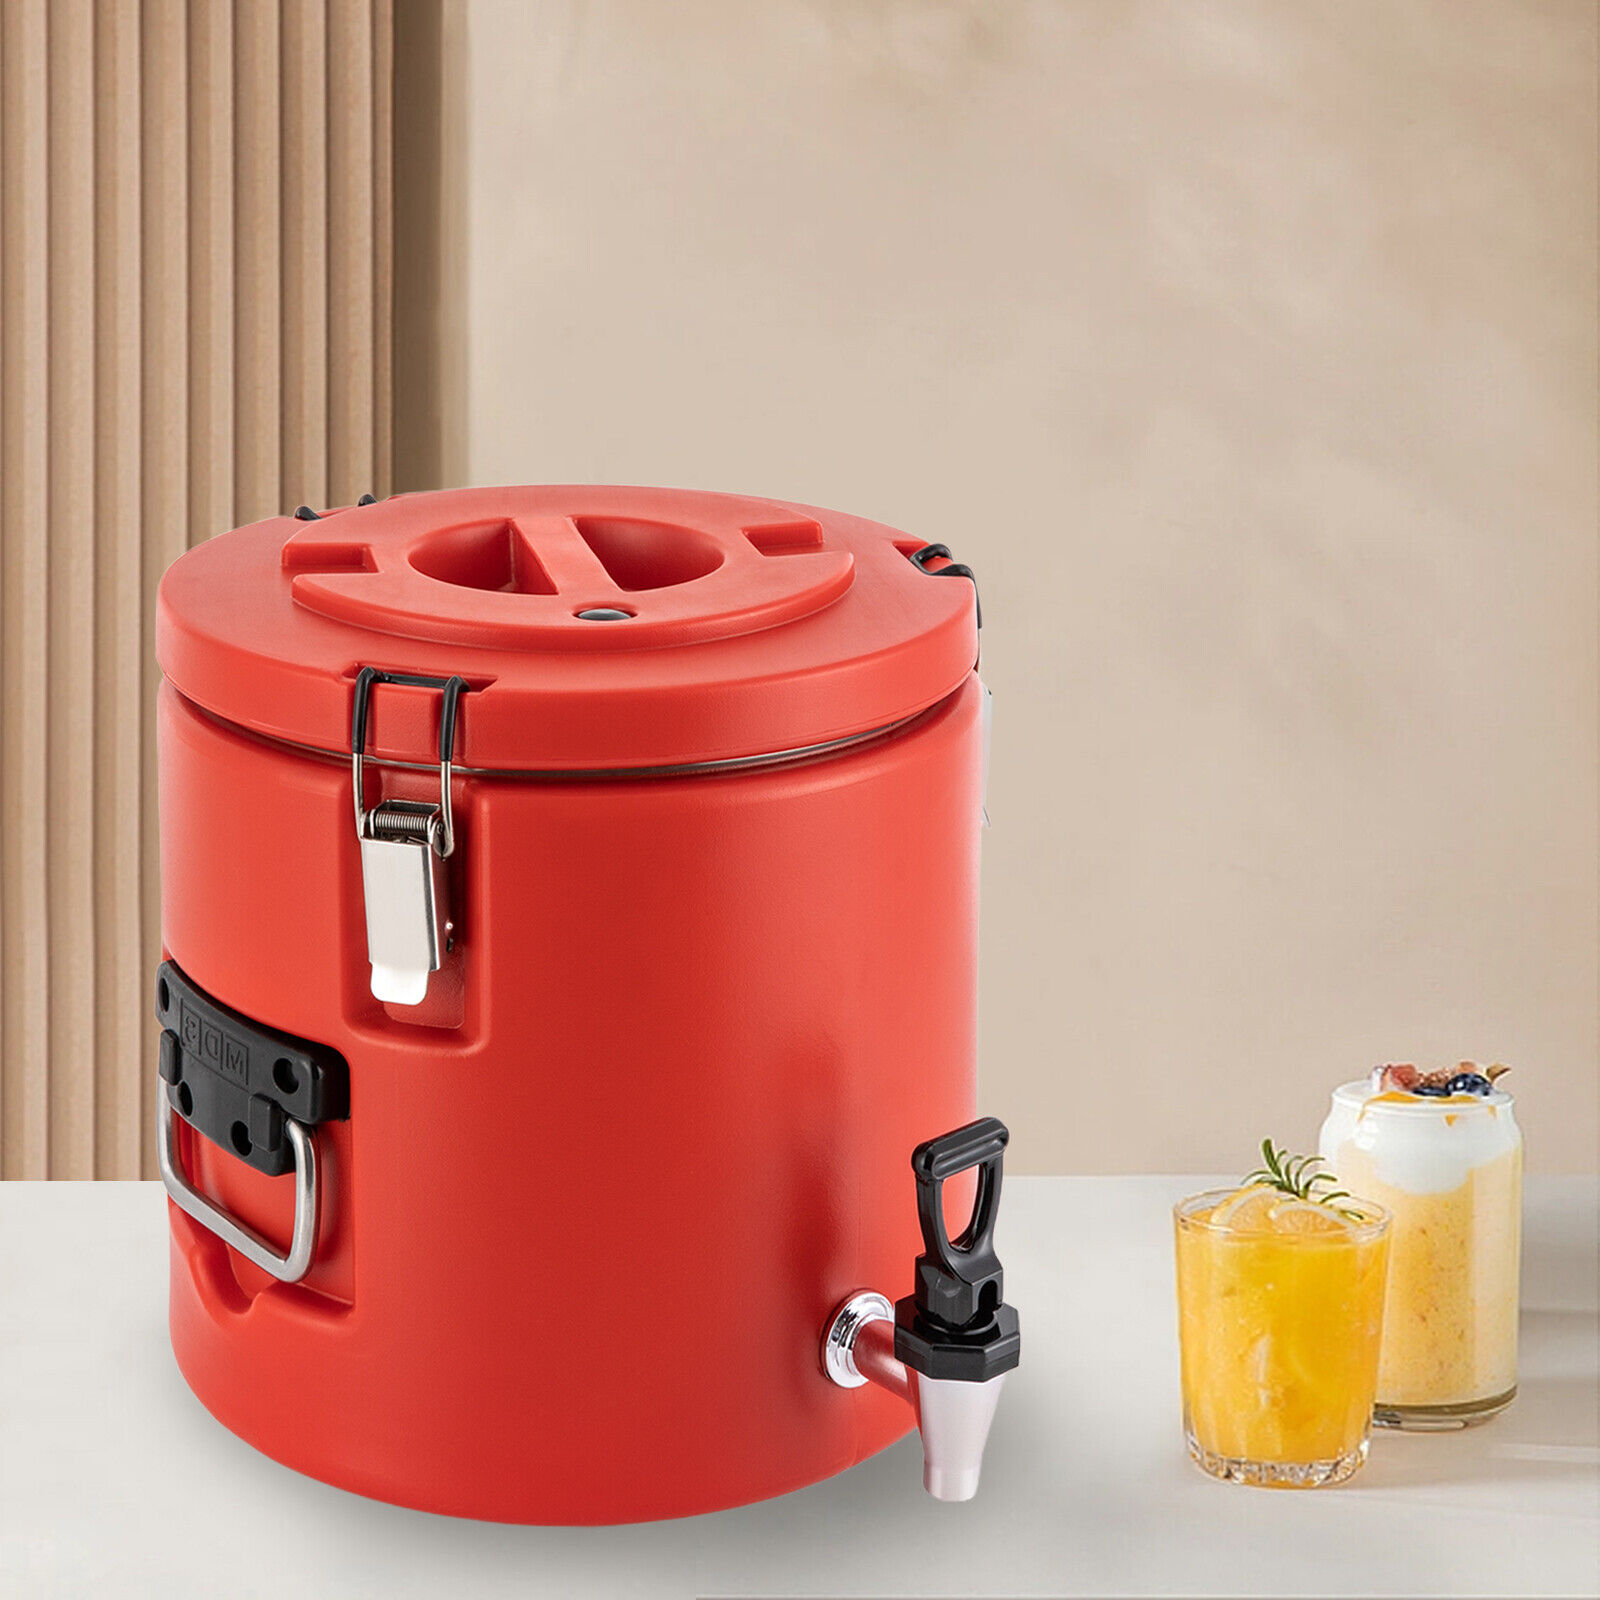 15L Insulated Thermal Hot and Cold Beverage Dispenser Coffee Tea Drinks Server 